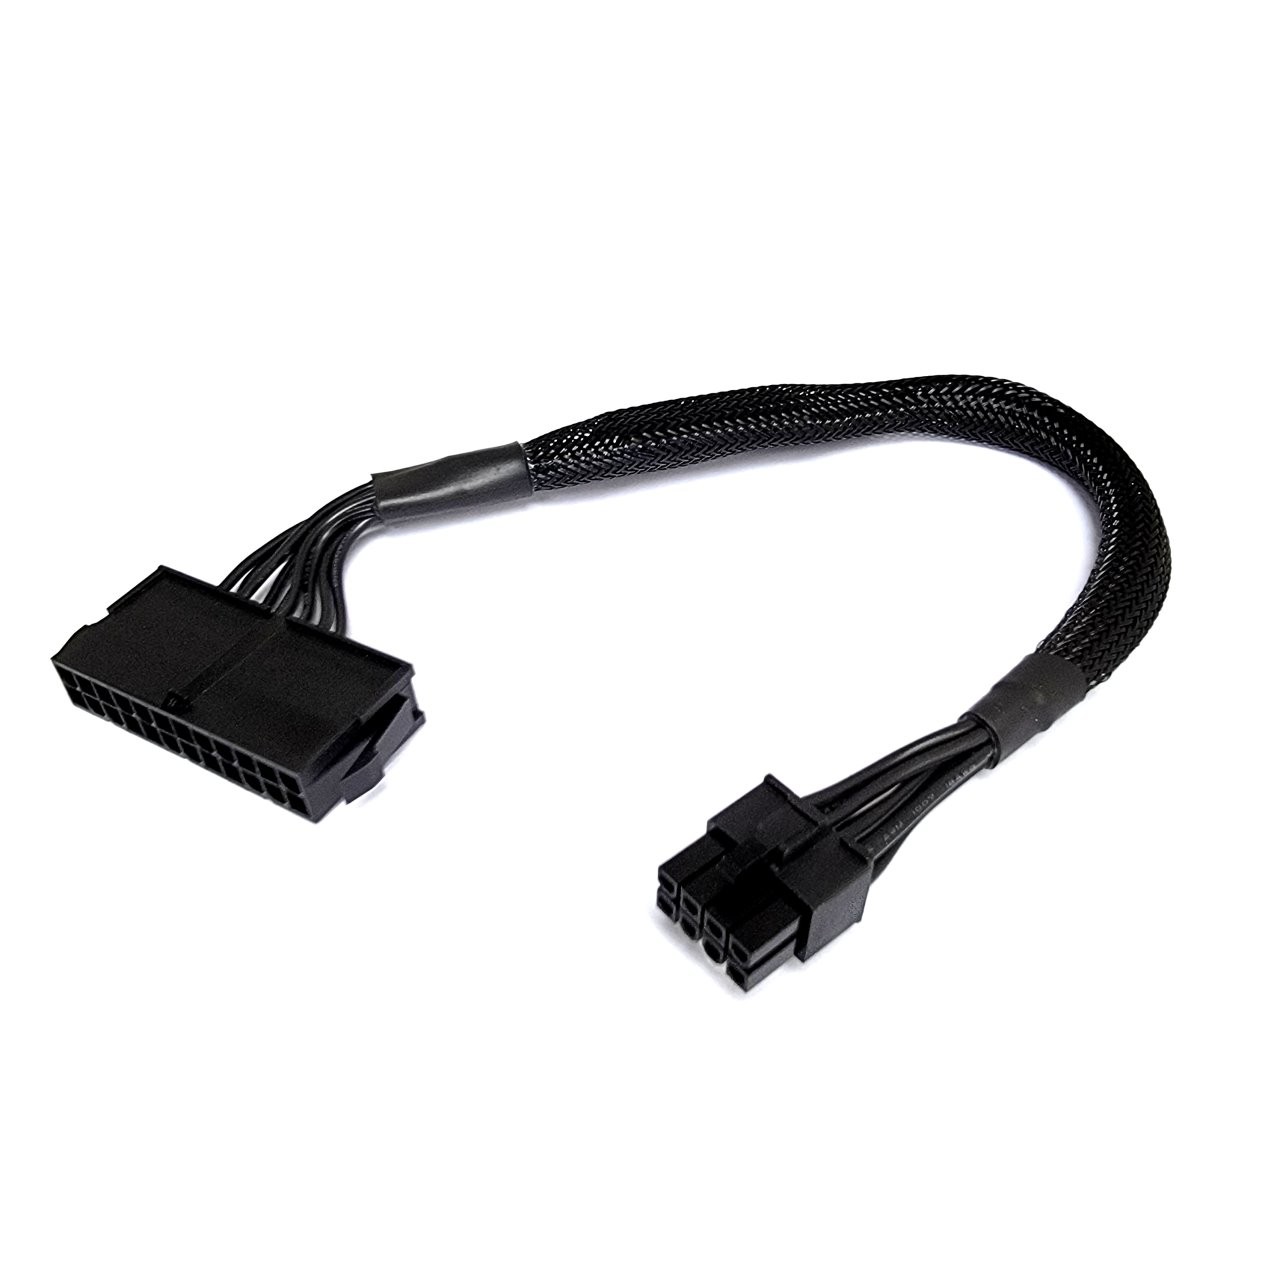 Dell OptiPlex 3020 PSU Main Power 24 Pin to 8 Pin Adapter Cable 30cm -  